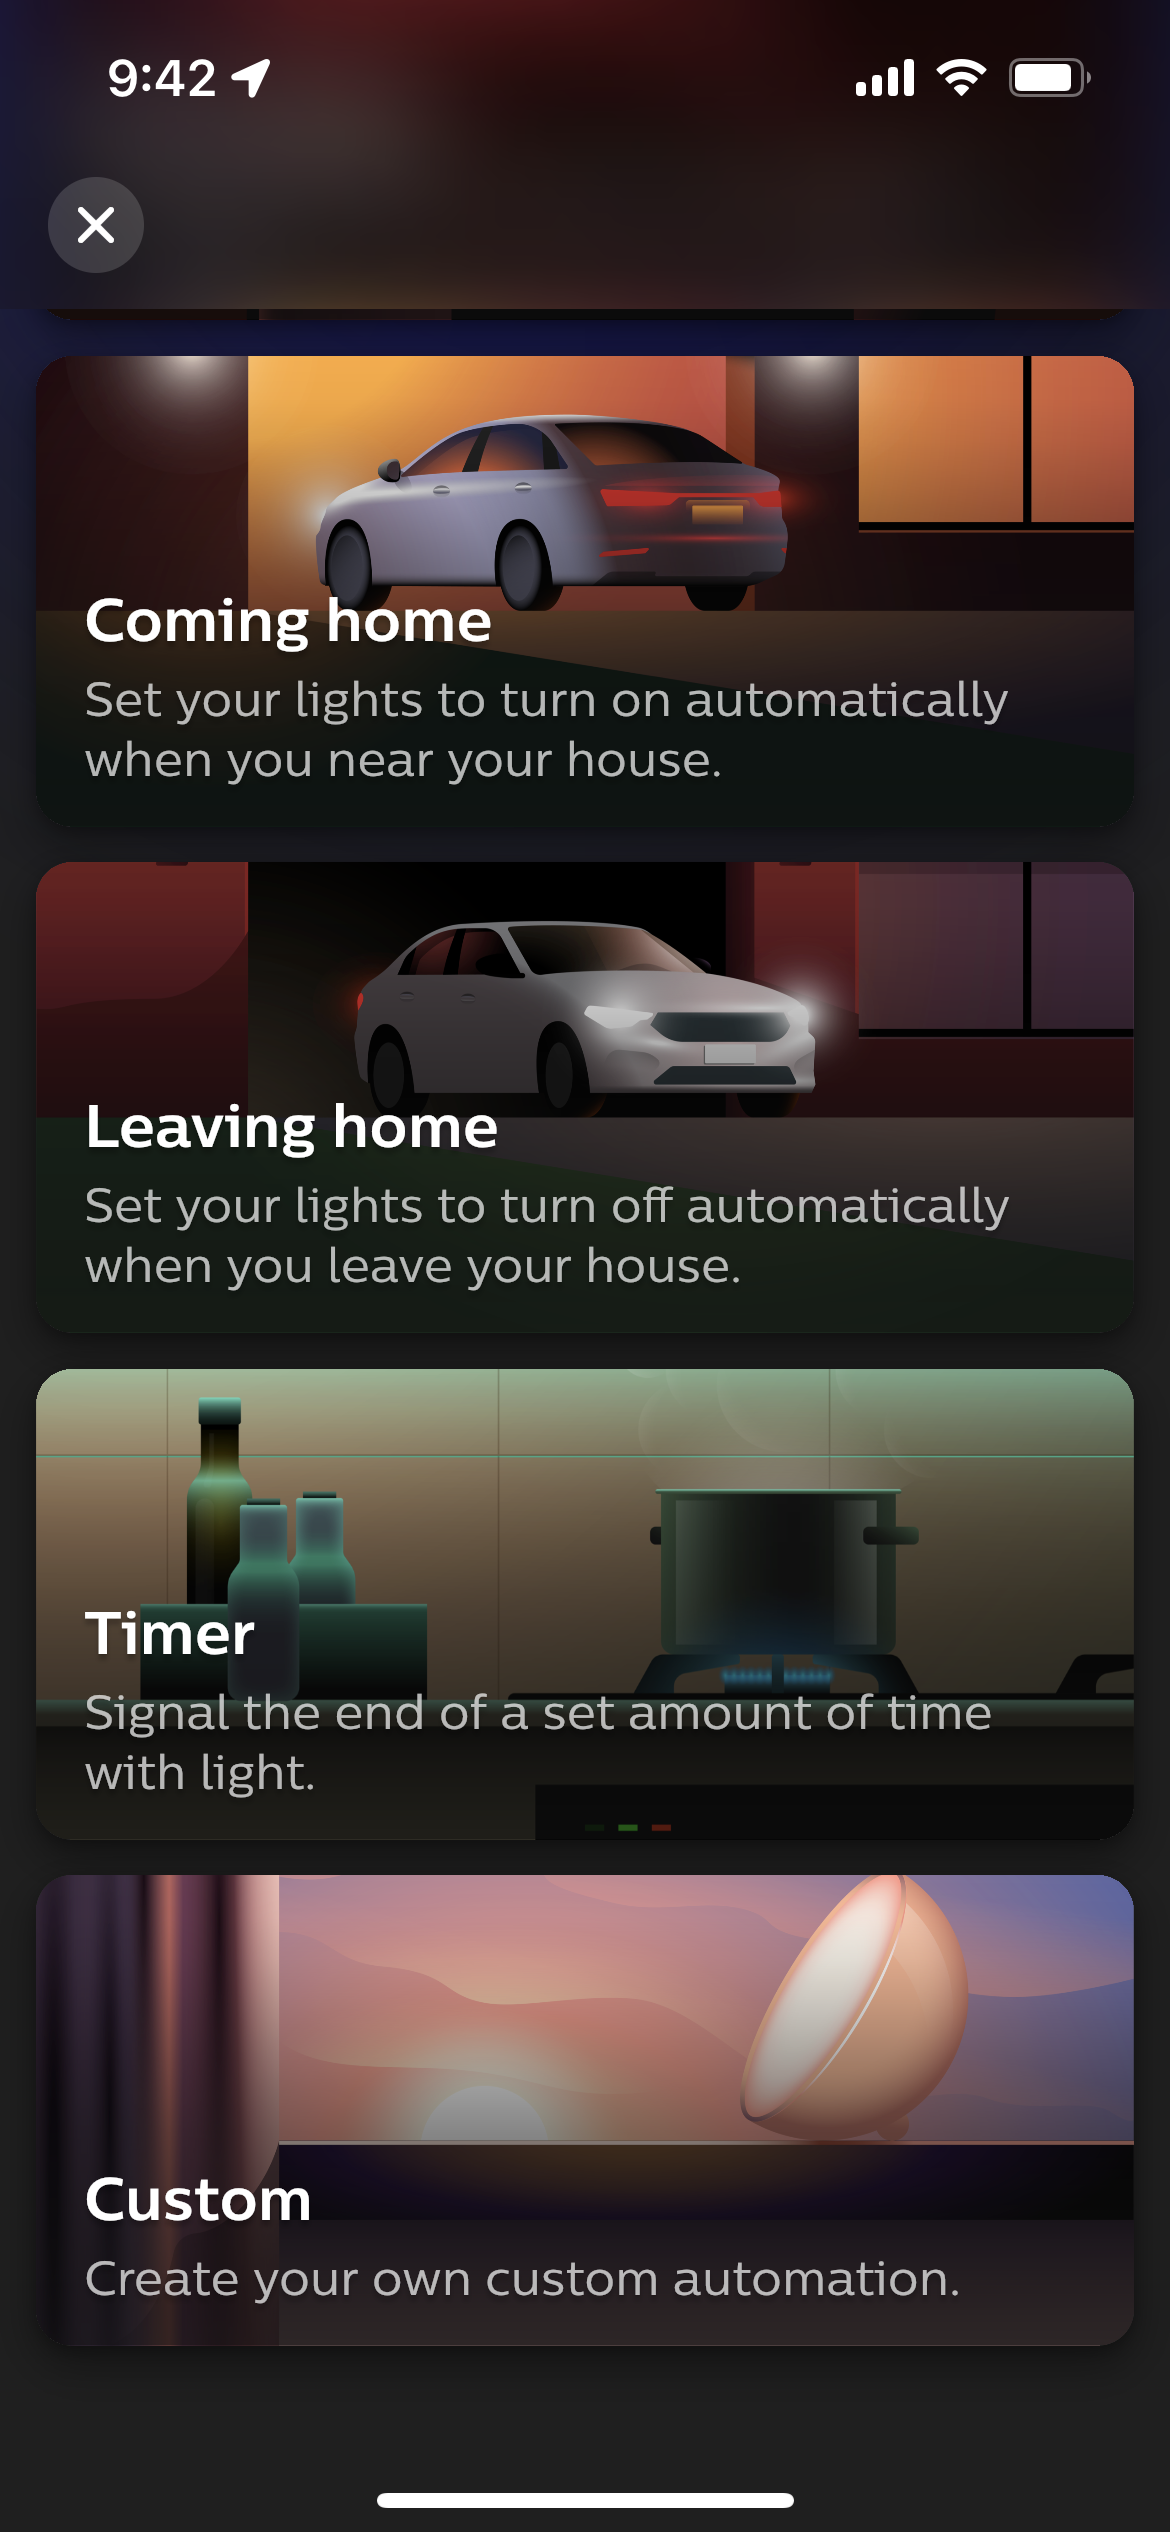 Automation presets in the Philips Hue app